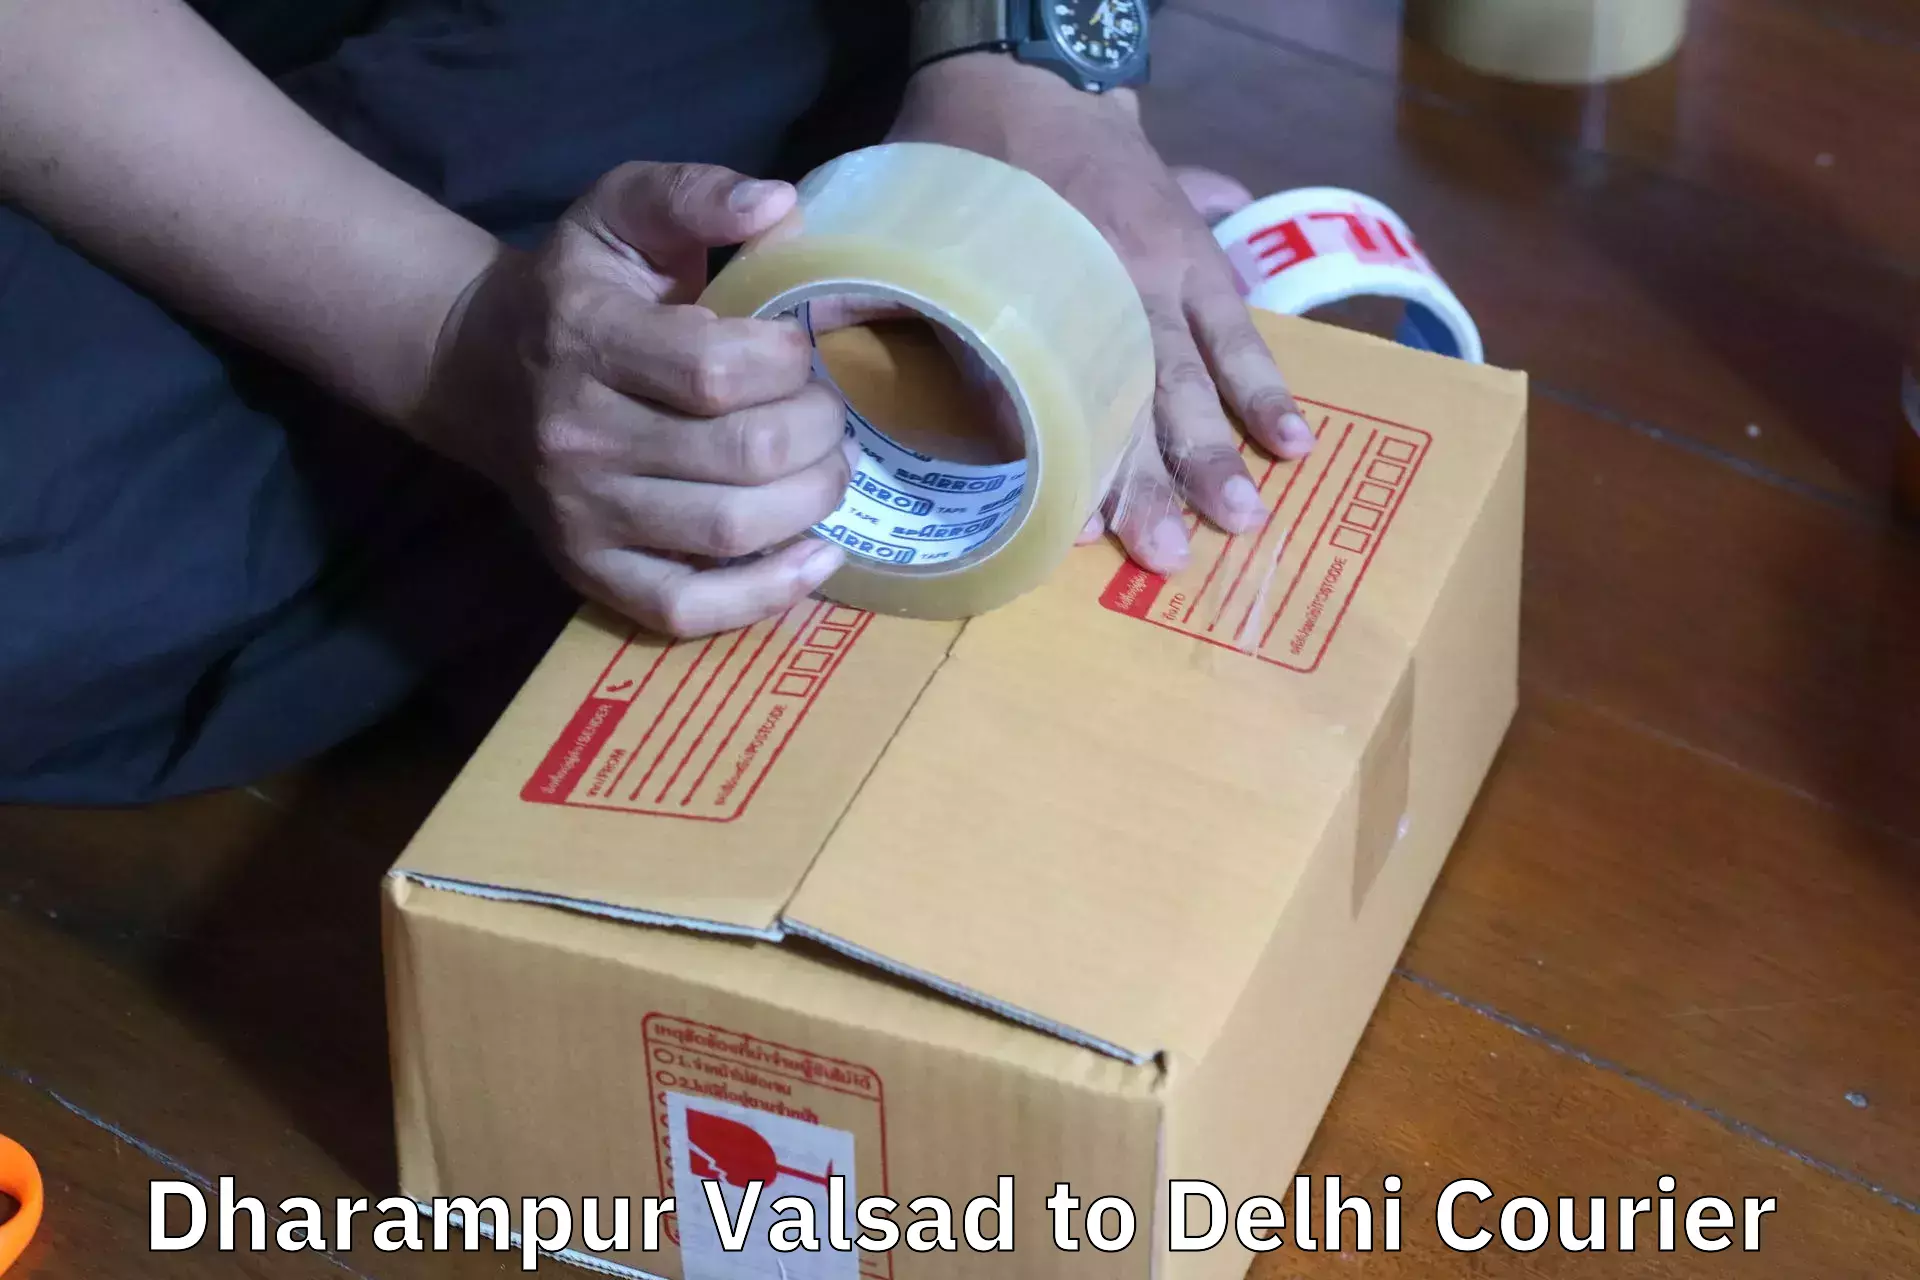 Budget-friendly movers Dharampur Valsad to IIT Delhi